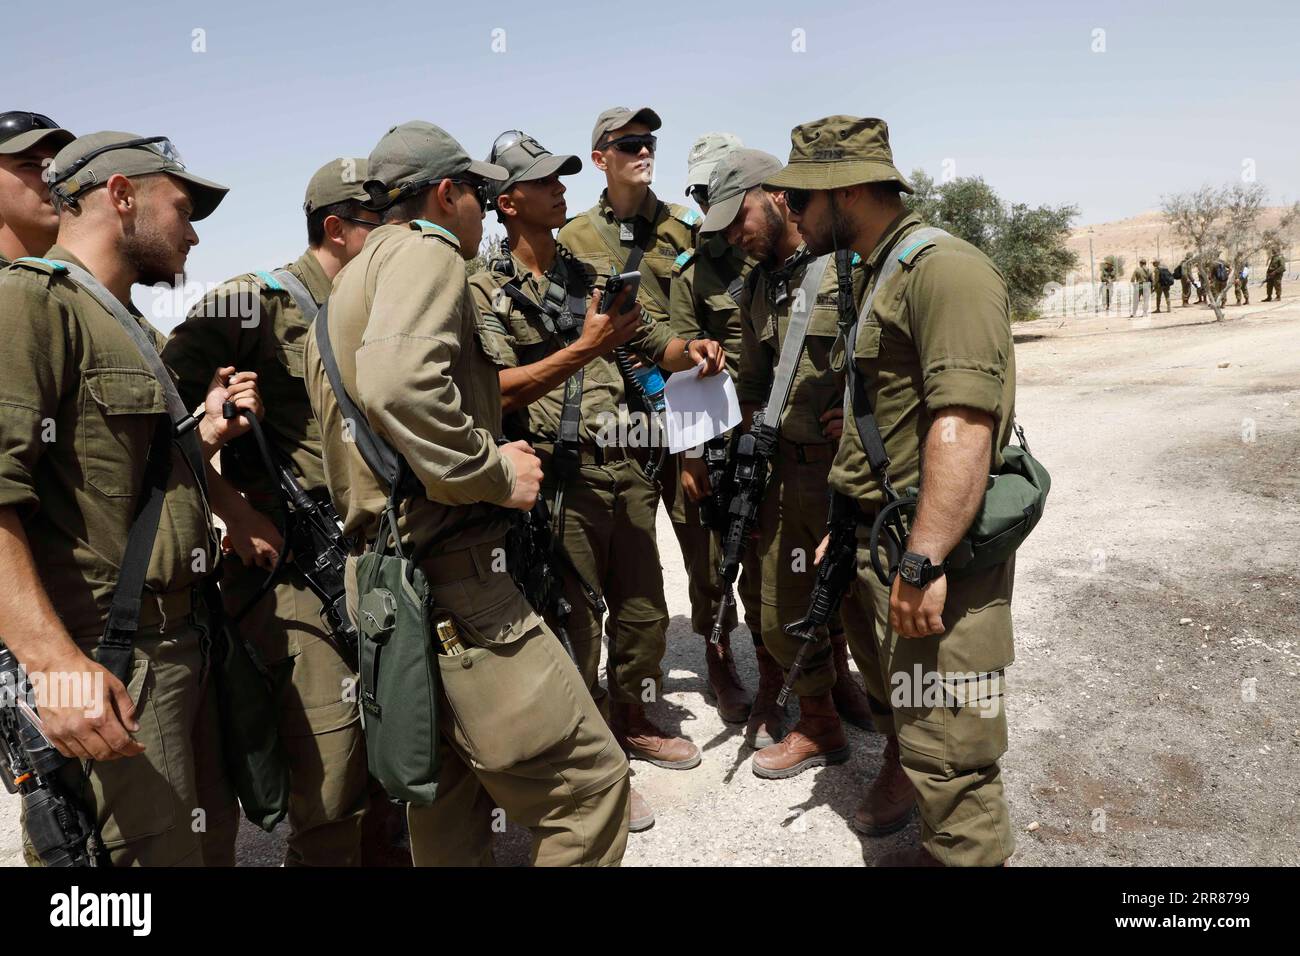 210422 -- ASHALIM, April 22, 2021 -- Israeli soldiers search near southern Israeli town of Ashalim, on April 22, 2021. Israel s military said on Thursday that it struck targets in Syria after a Syrian anti-aircraft missile hit southern Israel earlier in the day. There were no immediate reports of injuries or damage in Israel. Photo by /Xinhua ISRAEL-ASHALIM-SYRIA-MISSILE ATTACK GilxCohenxMagen PUBLICATIONxNOTxINxCHN Stock Photo